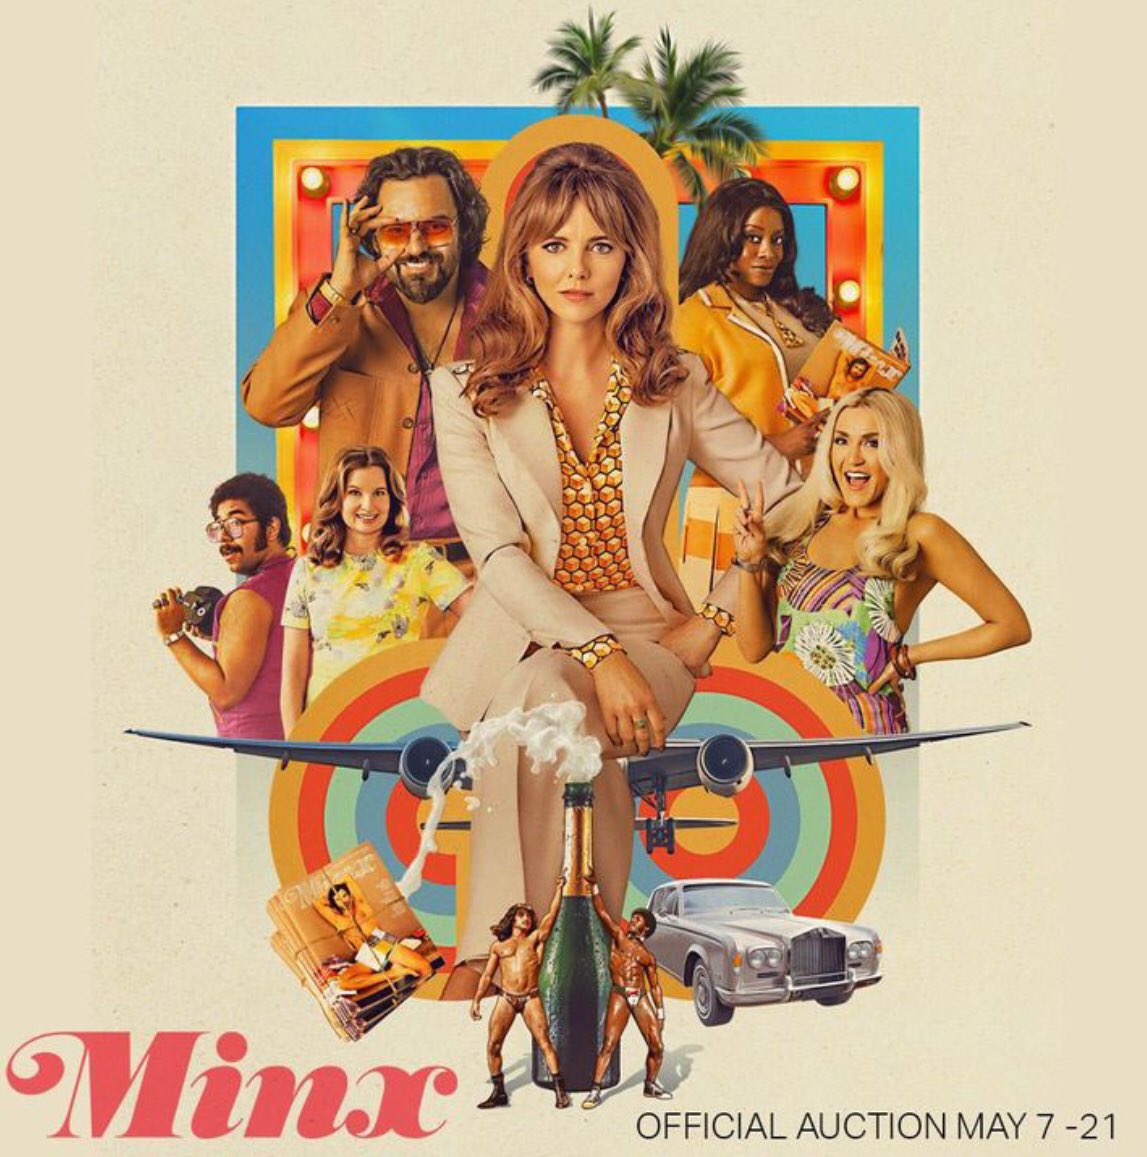 The Official Minx Auction Starts Today! The Auction Features Screen Used Props and Wardrobe from Seasons 1 & 2. Get your Bids in Now!

 #costumedesign #auction #movieprops #BidNow #moviememorabila #screenused #props #minx